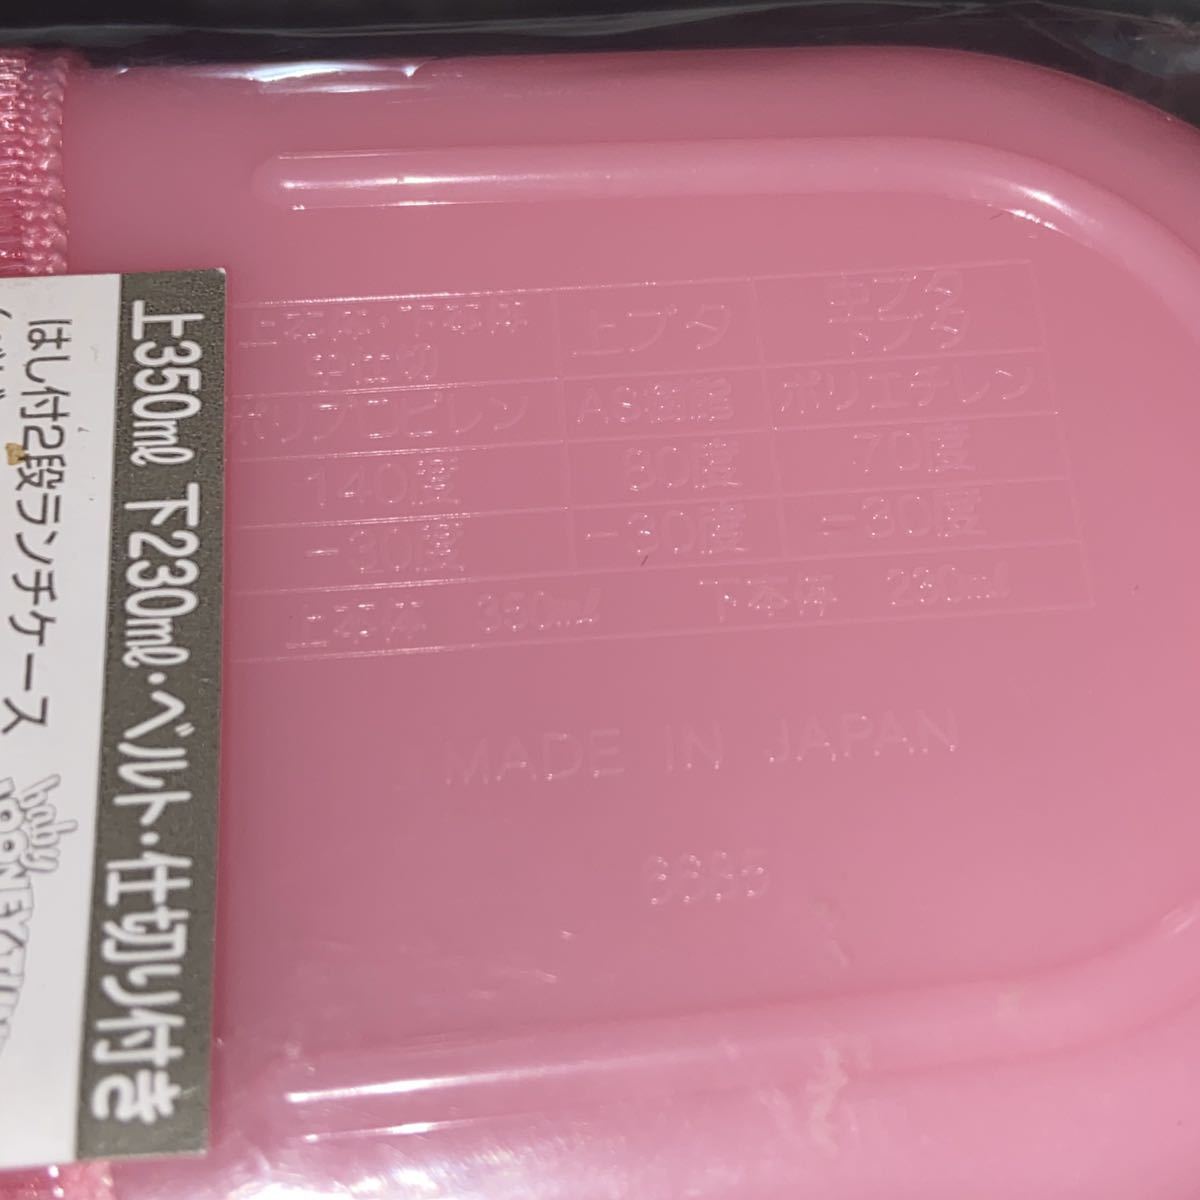  Looney toe n* baby tui- tea * chopsticks attaching 2 step lunch case * unopened, unused, records out of production,.. goods * pink * made in Japan *. lunch box 